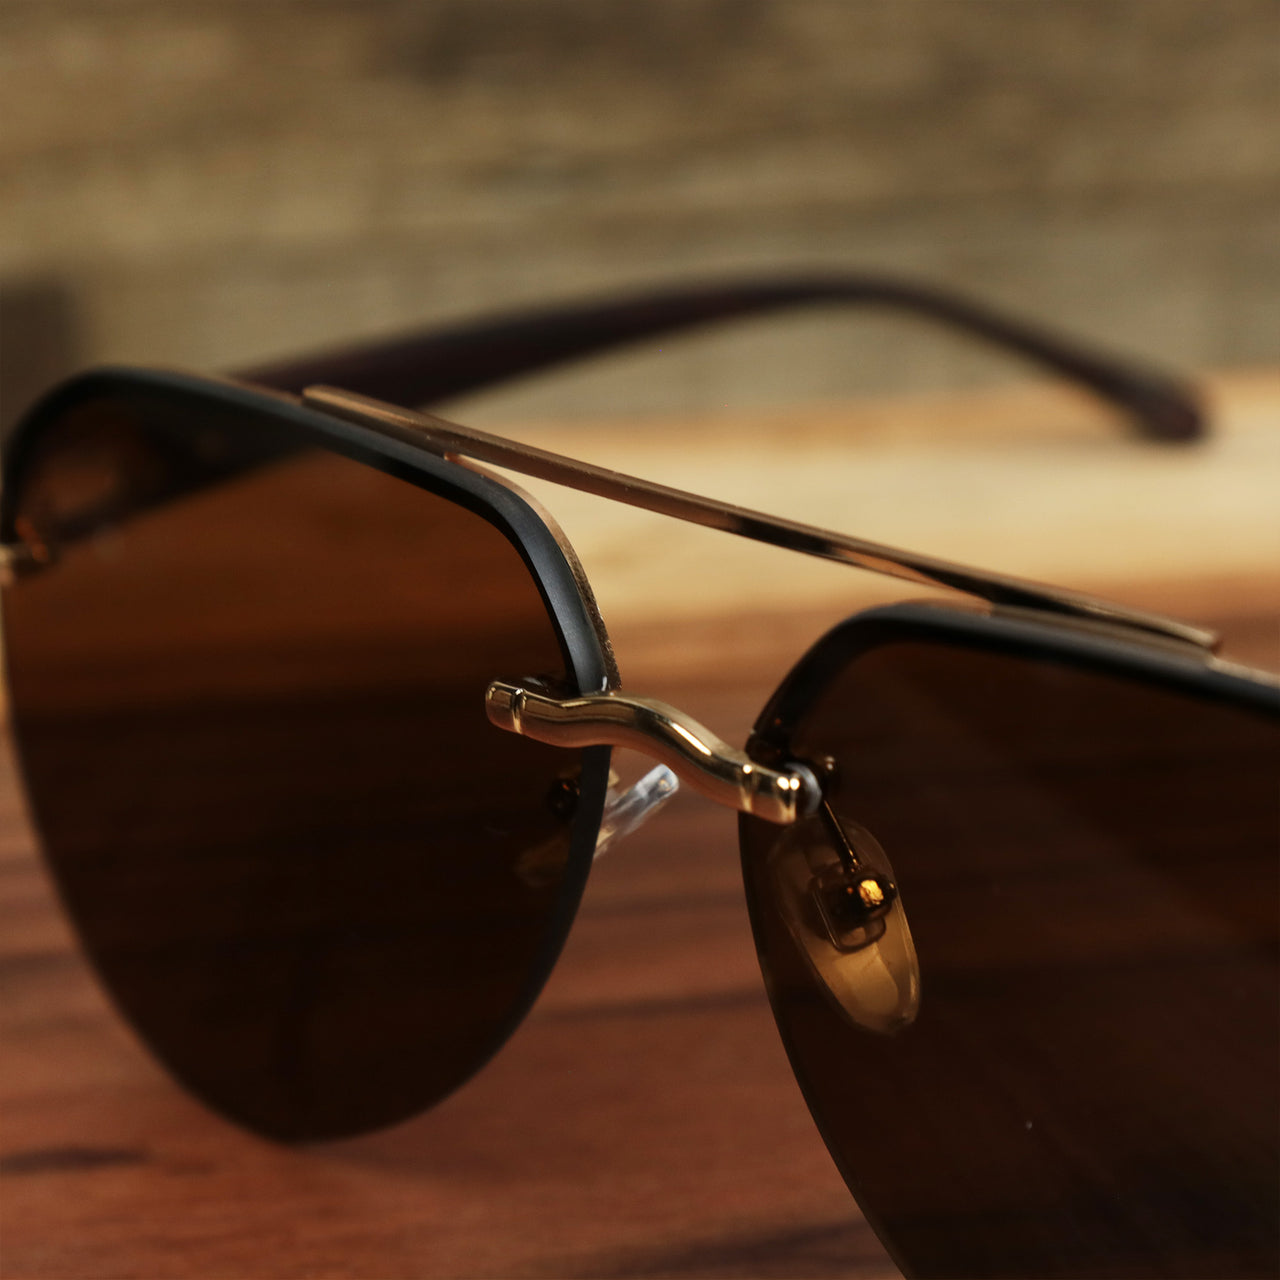 The bridge on the Round Aviator Frames Brown Lens Sunglasses with Gold Frame